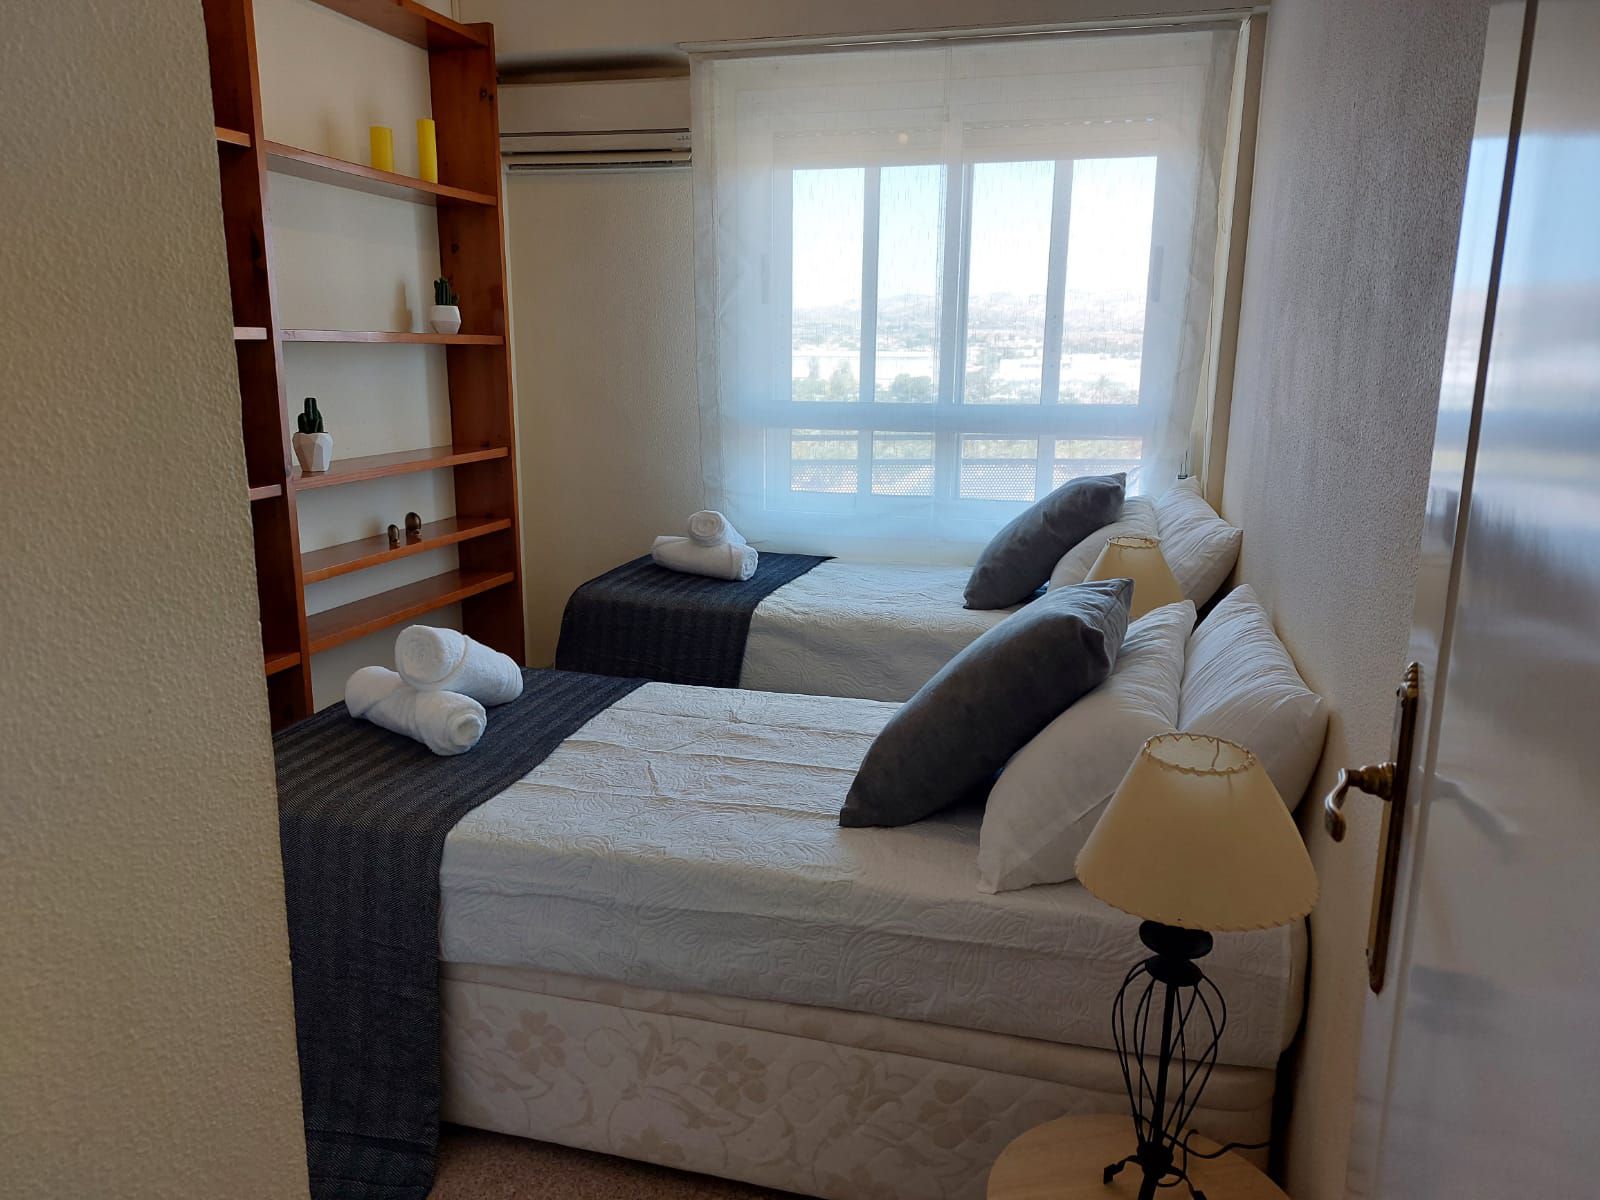 Alginet - Furnished apartment for rent in Alicante